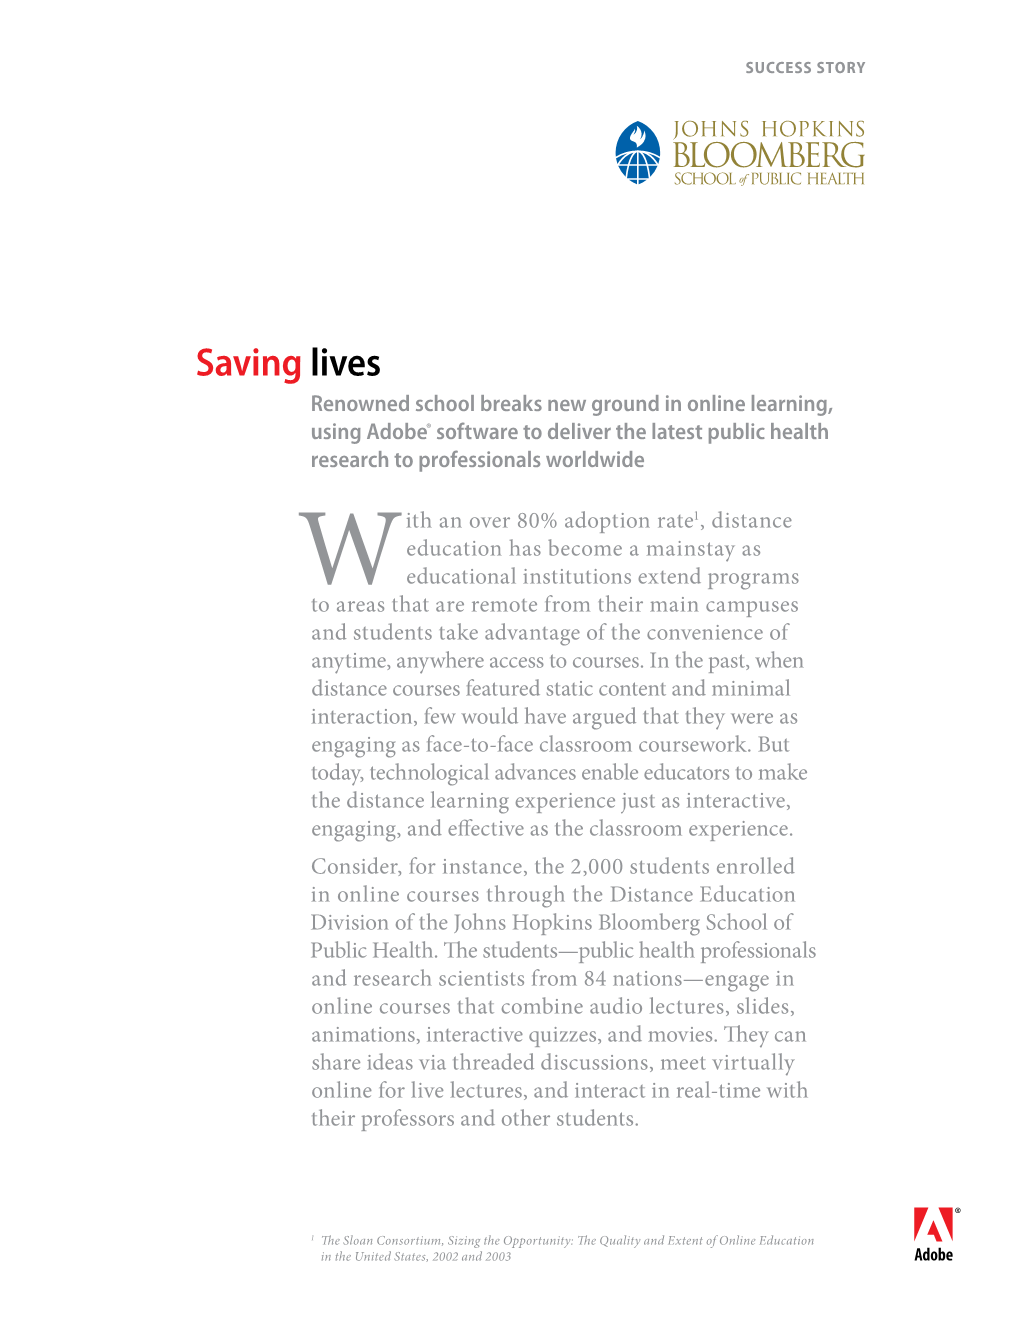 Saving Lives Renowned School Breaks New Ground in Online Learning, Using Adobe® Software to Deliver the Latest Public Health Research to Professionals Worldwide